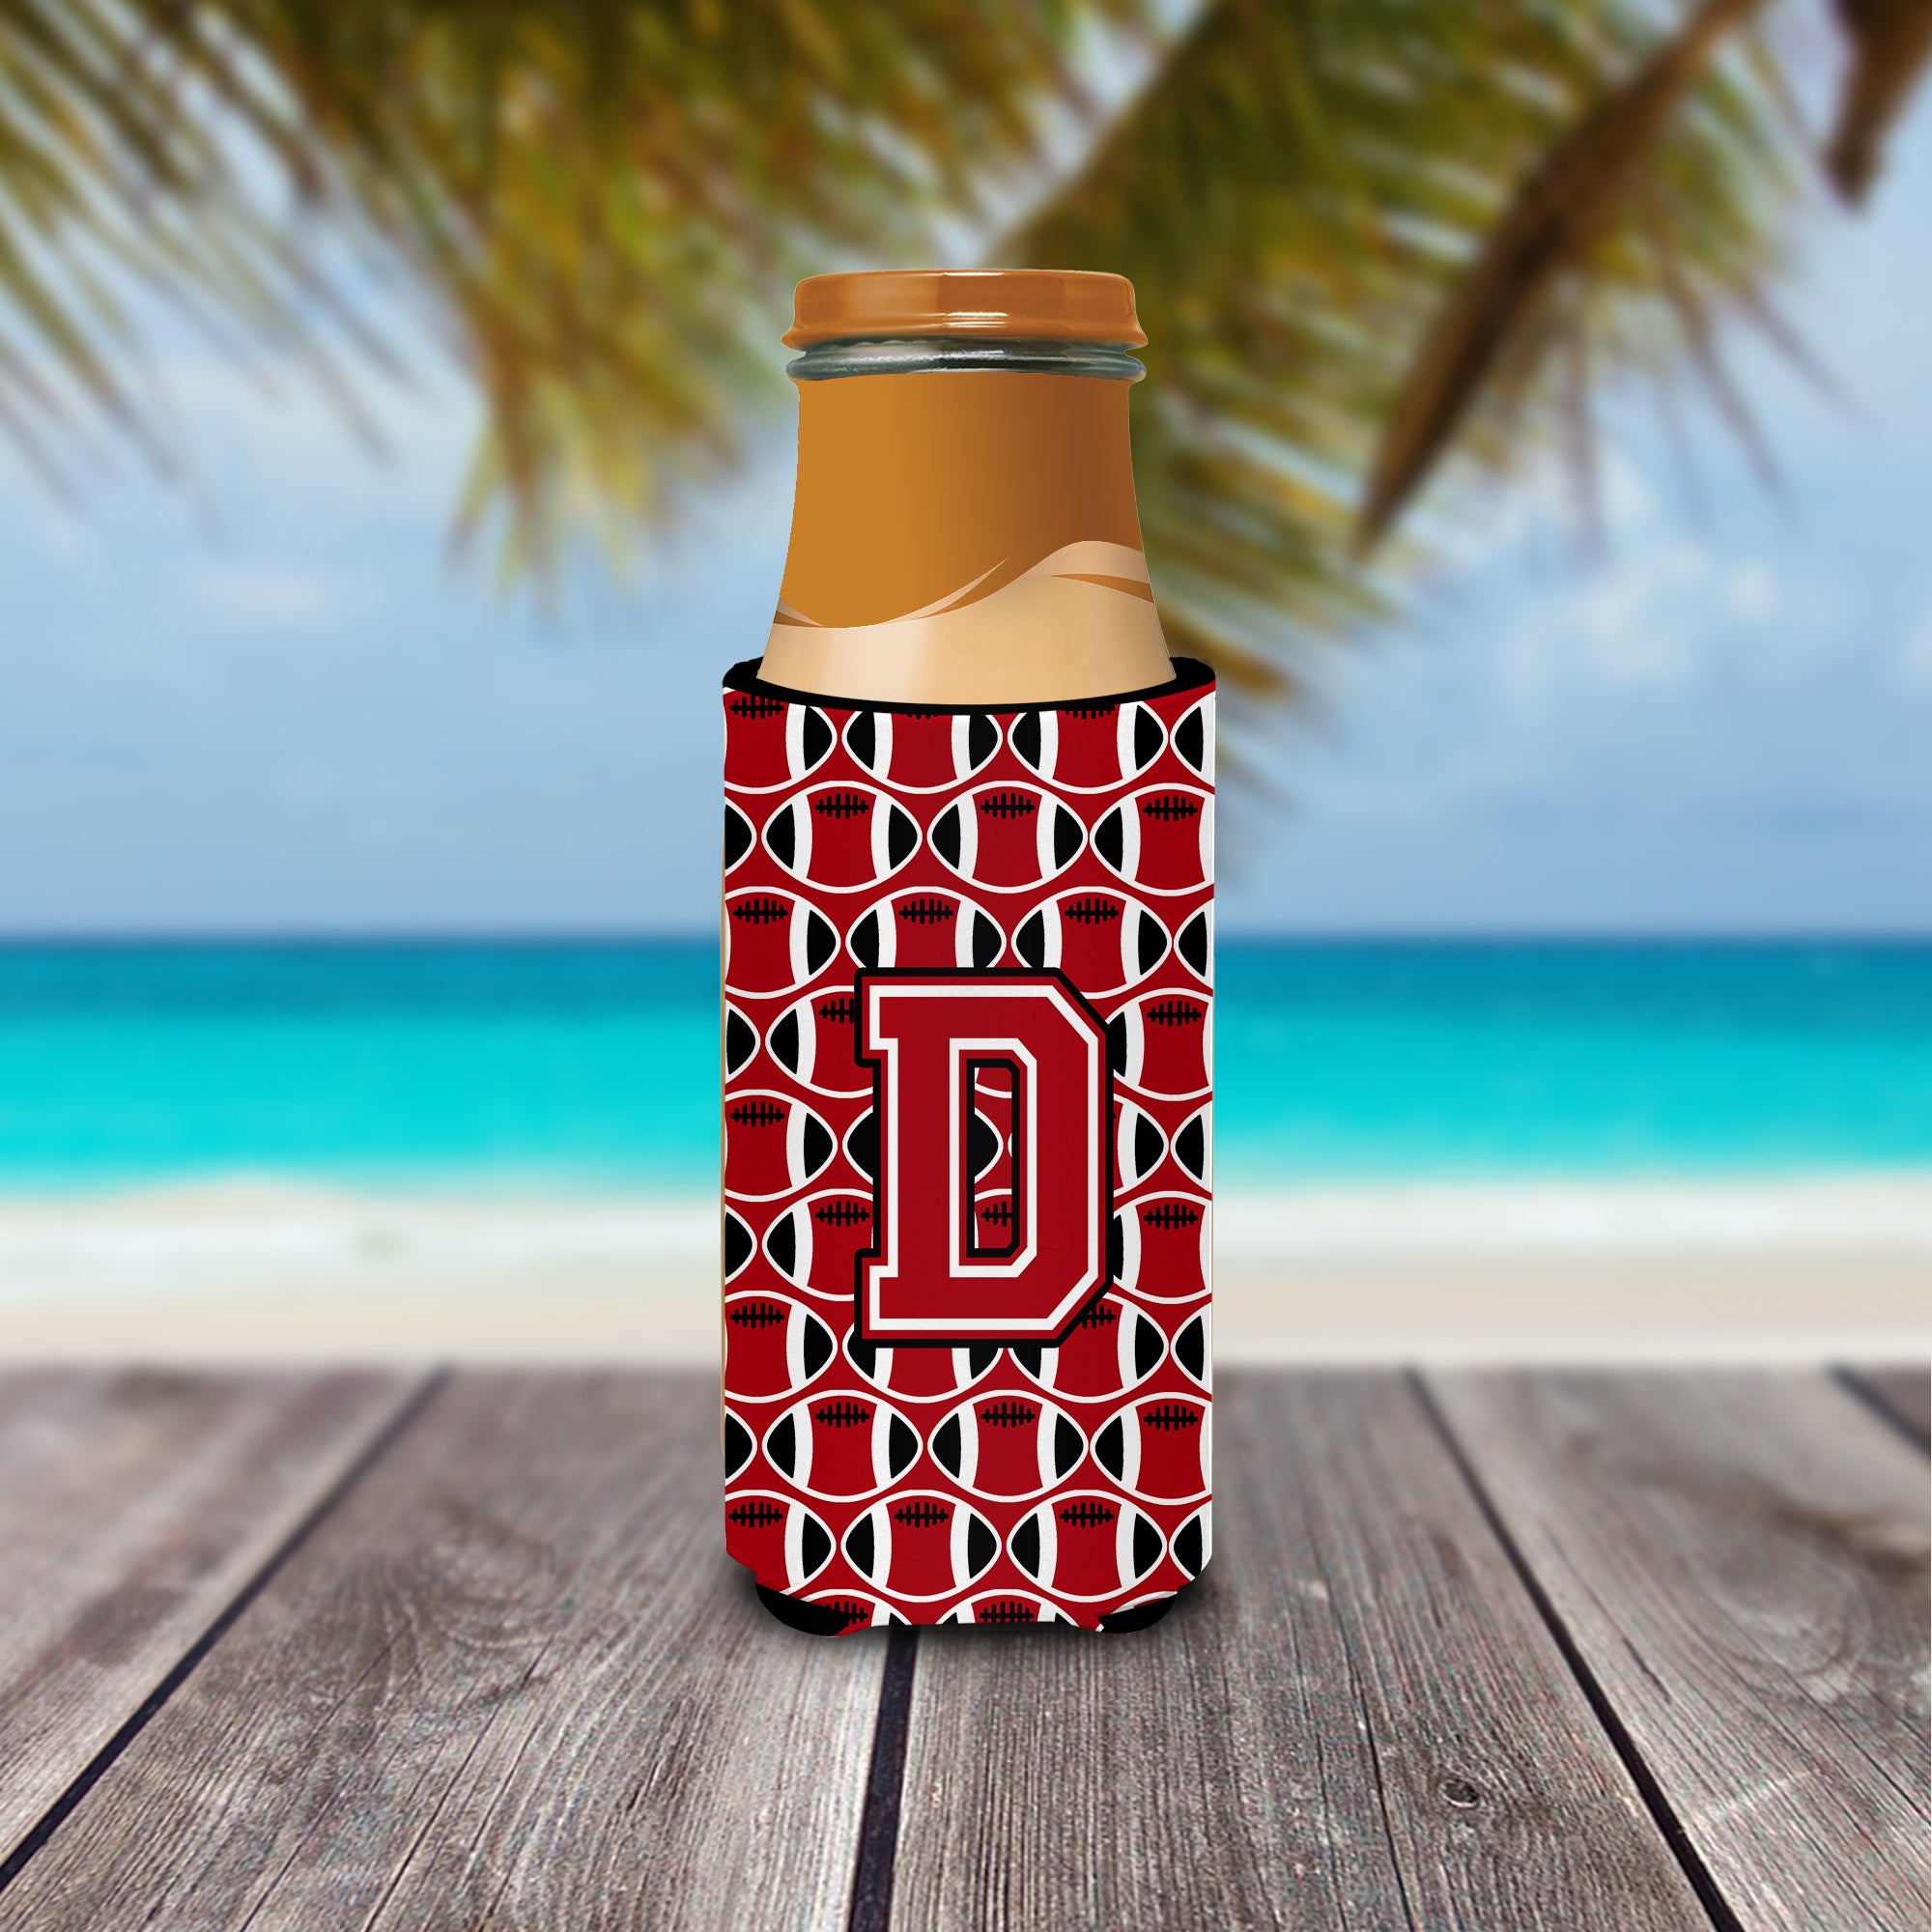 Letter D Football Red, Black and White Ultra Beverage Insulators for slim cans CJ1073-DMUK